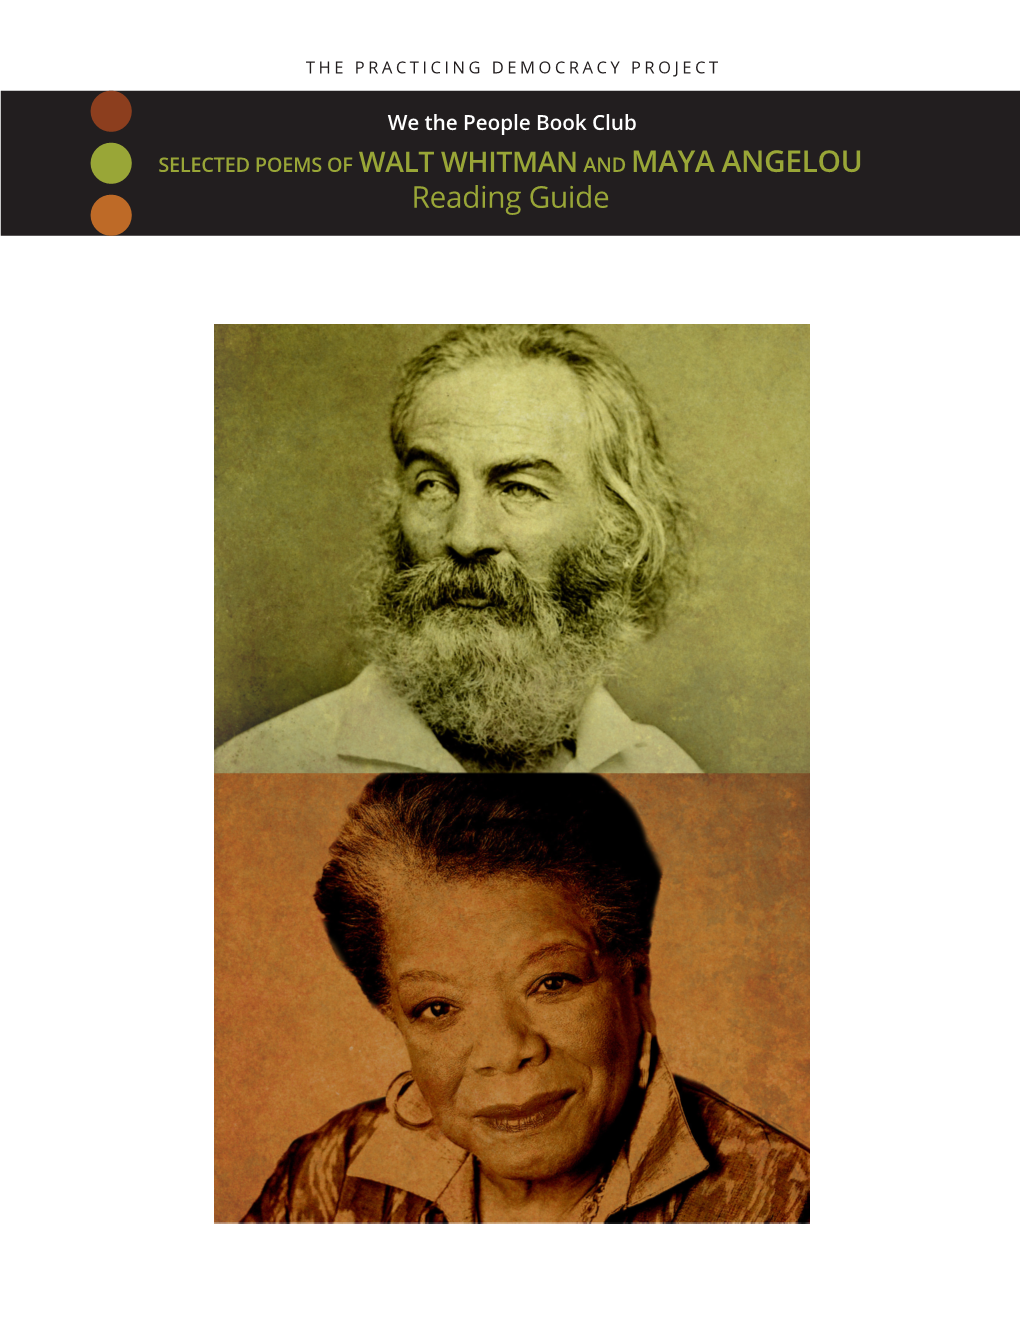 Reading Guide This We the People Book Club Reading Guide Focuses on Poetry, Specifically Two of the Most Ebullient American Poets, Walt Whitman and Maya Angelou